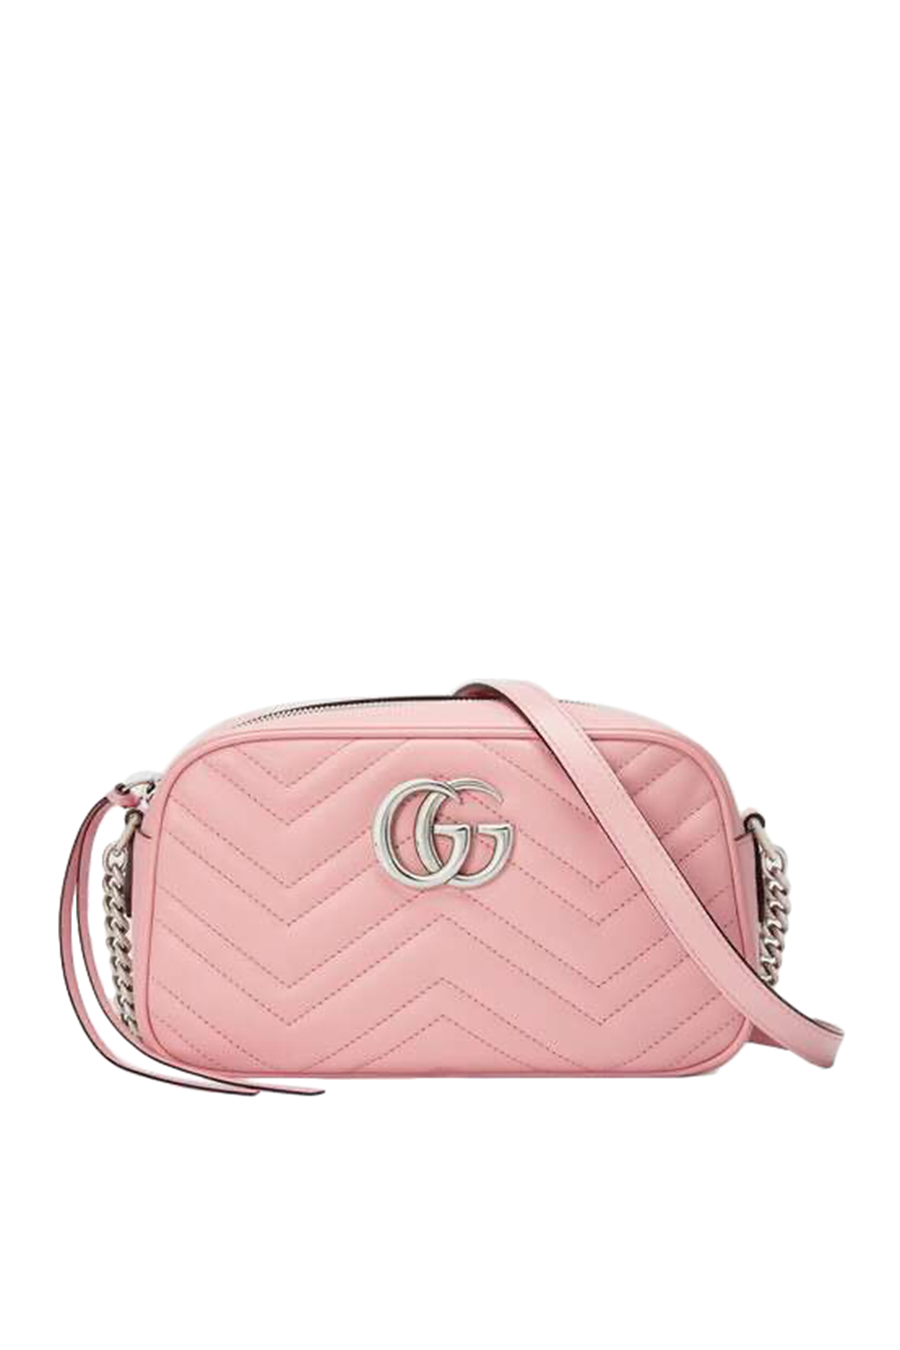 Buy Light Pink Gucci GG Marmont Small Shoulder Bag for Womens | Bloomingdales Kuwait